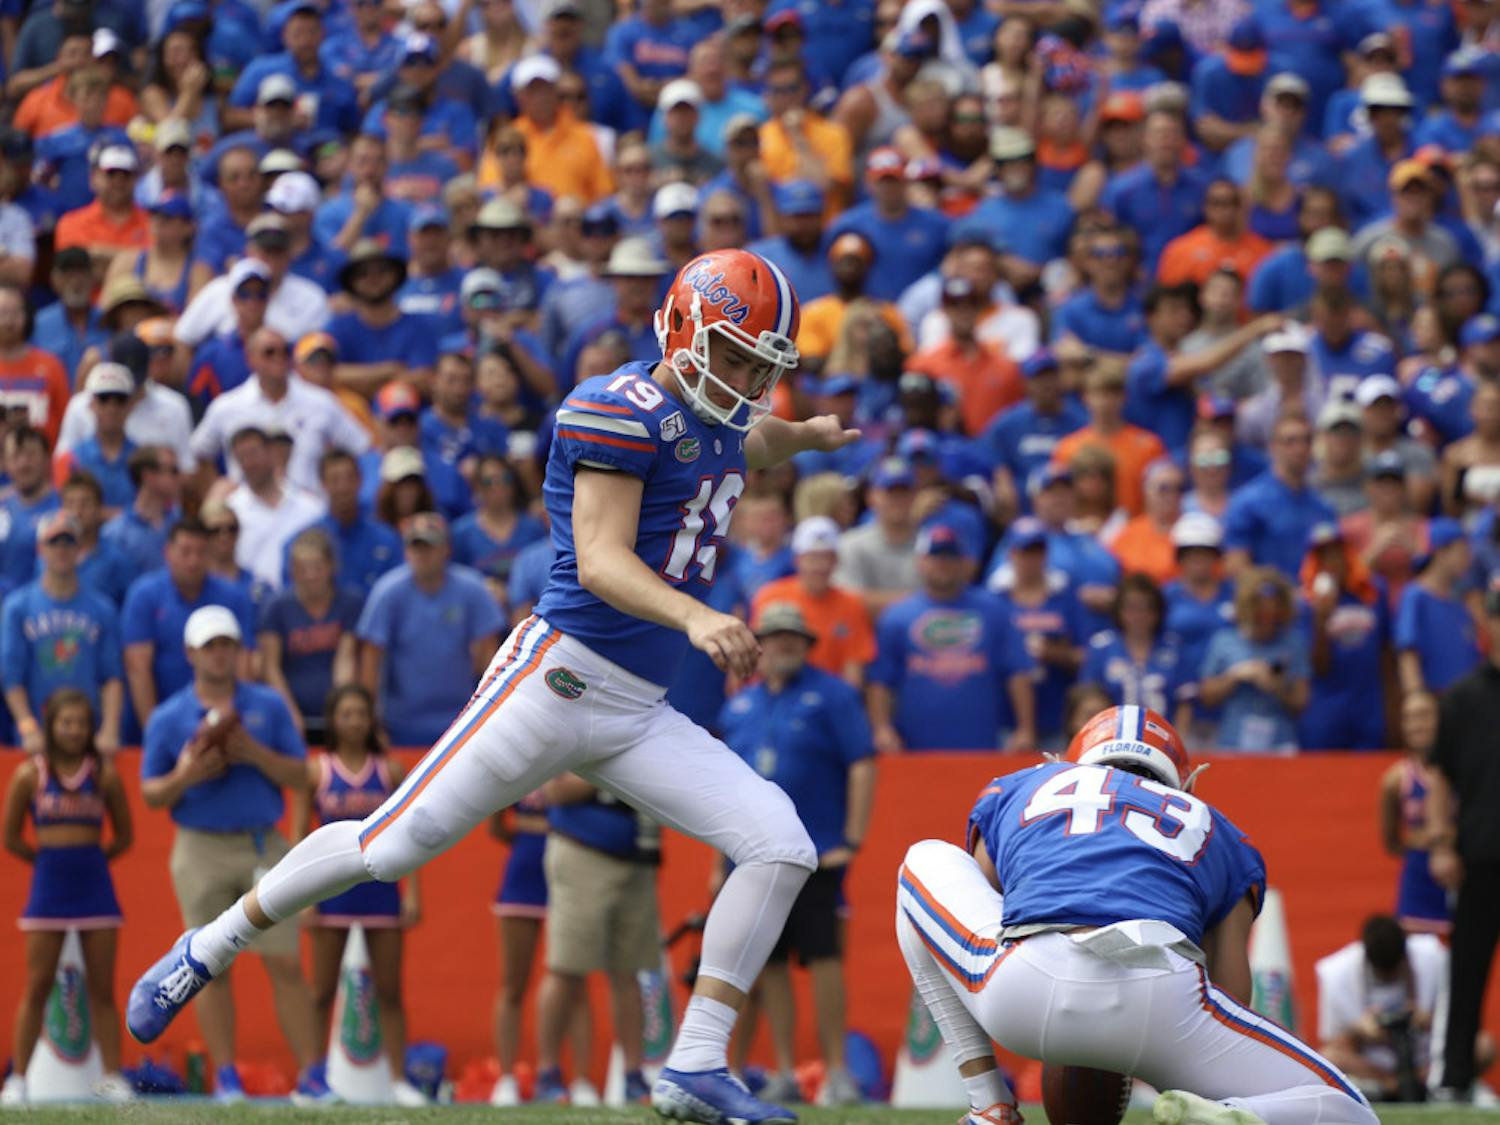 Gators kicker Evan McPherson said that holidays away from home is one of the sacrifices he makes to play Division I football at UF.